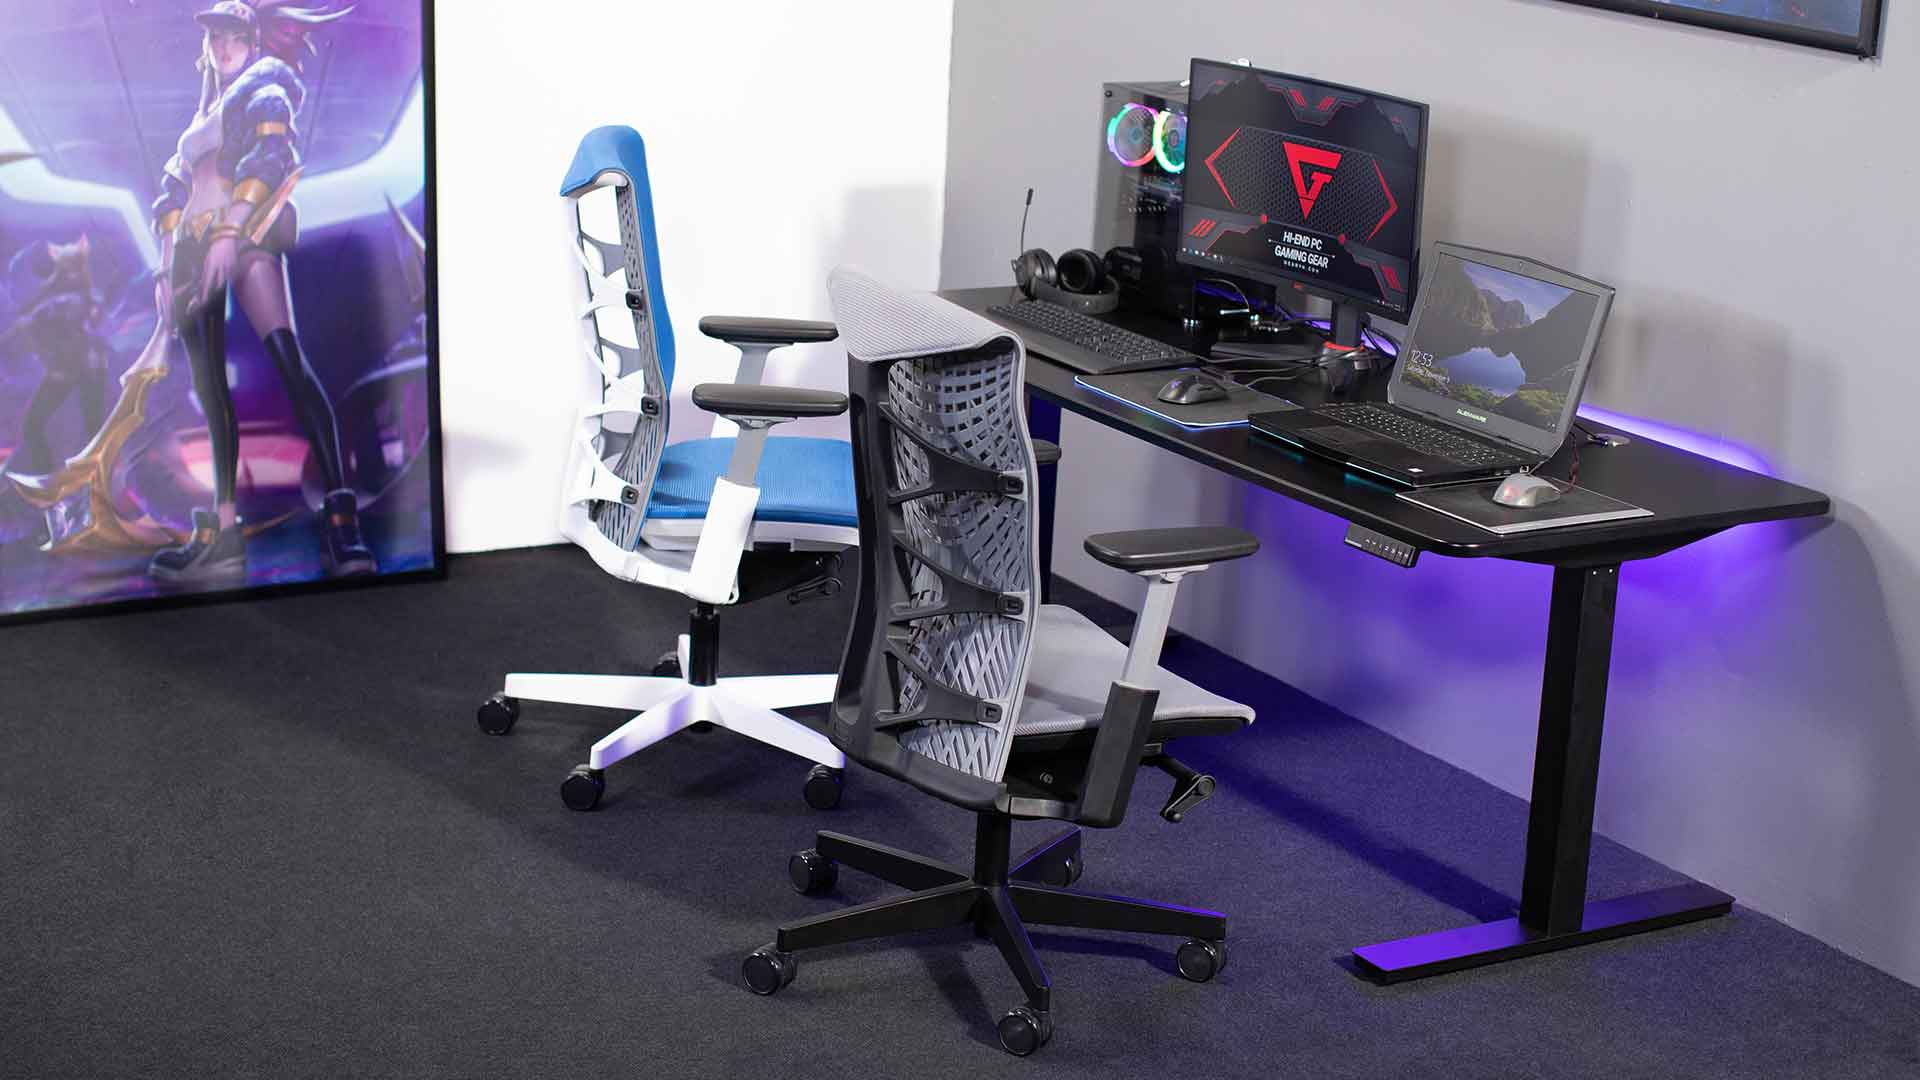 https://cdn.autonomous.ai/static/upload/images/new_post/13-cool-gaming-desk-accessories-every-gamer-should-have-174-1588699830303.jpg